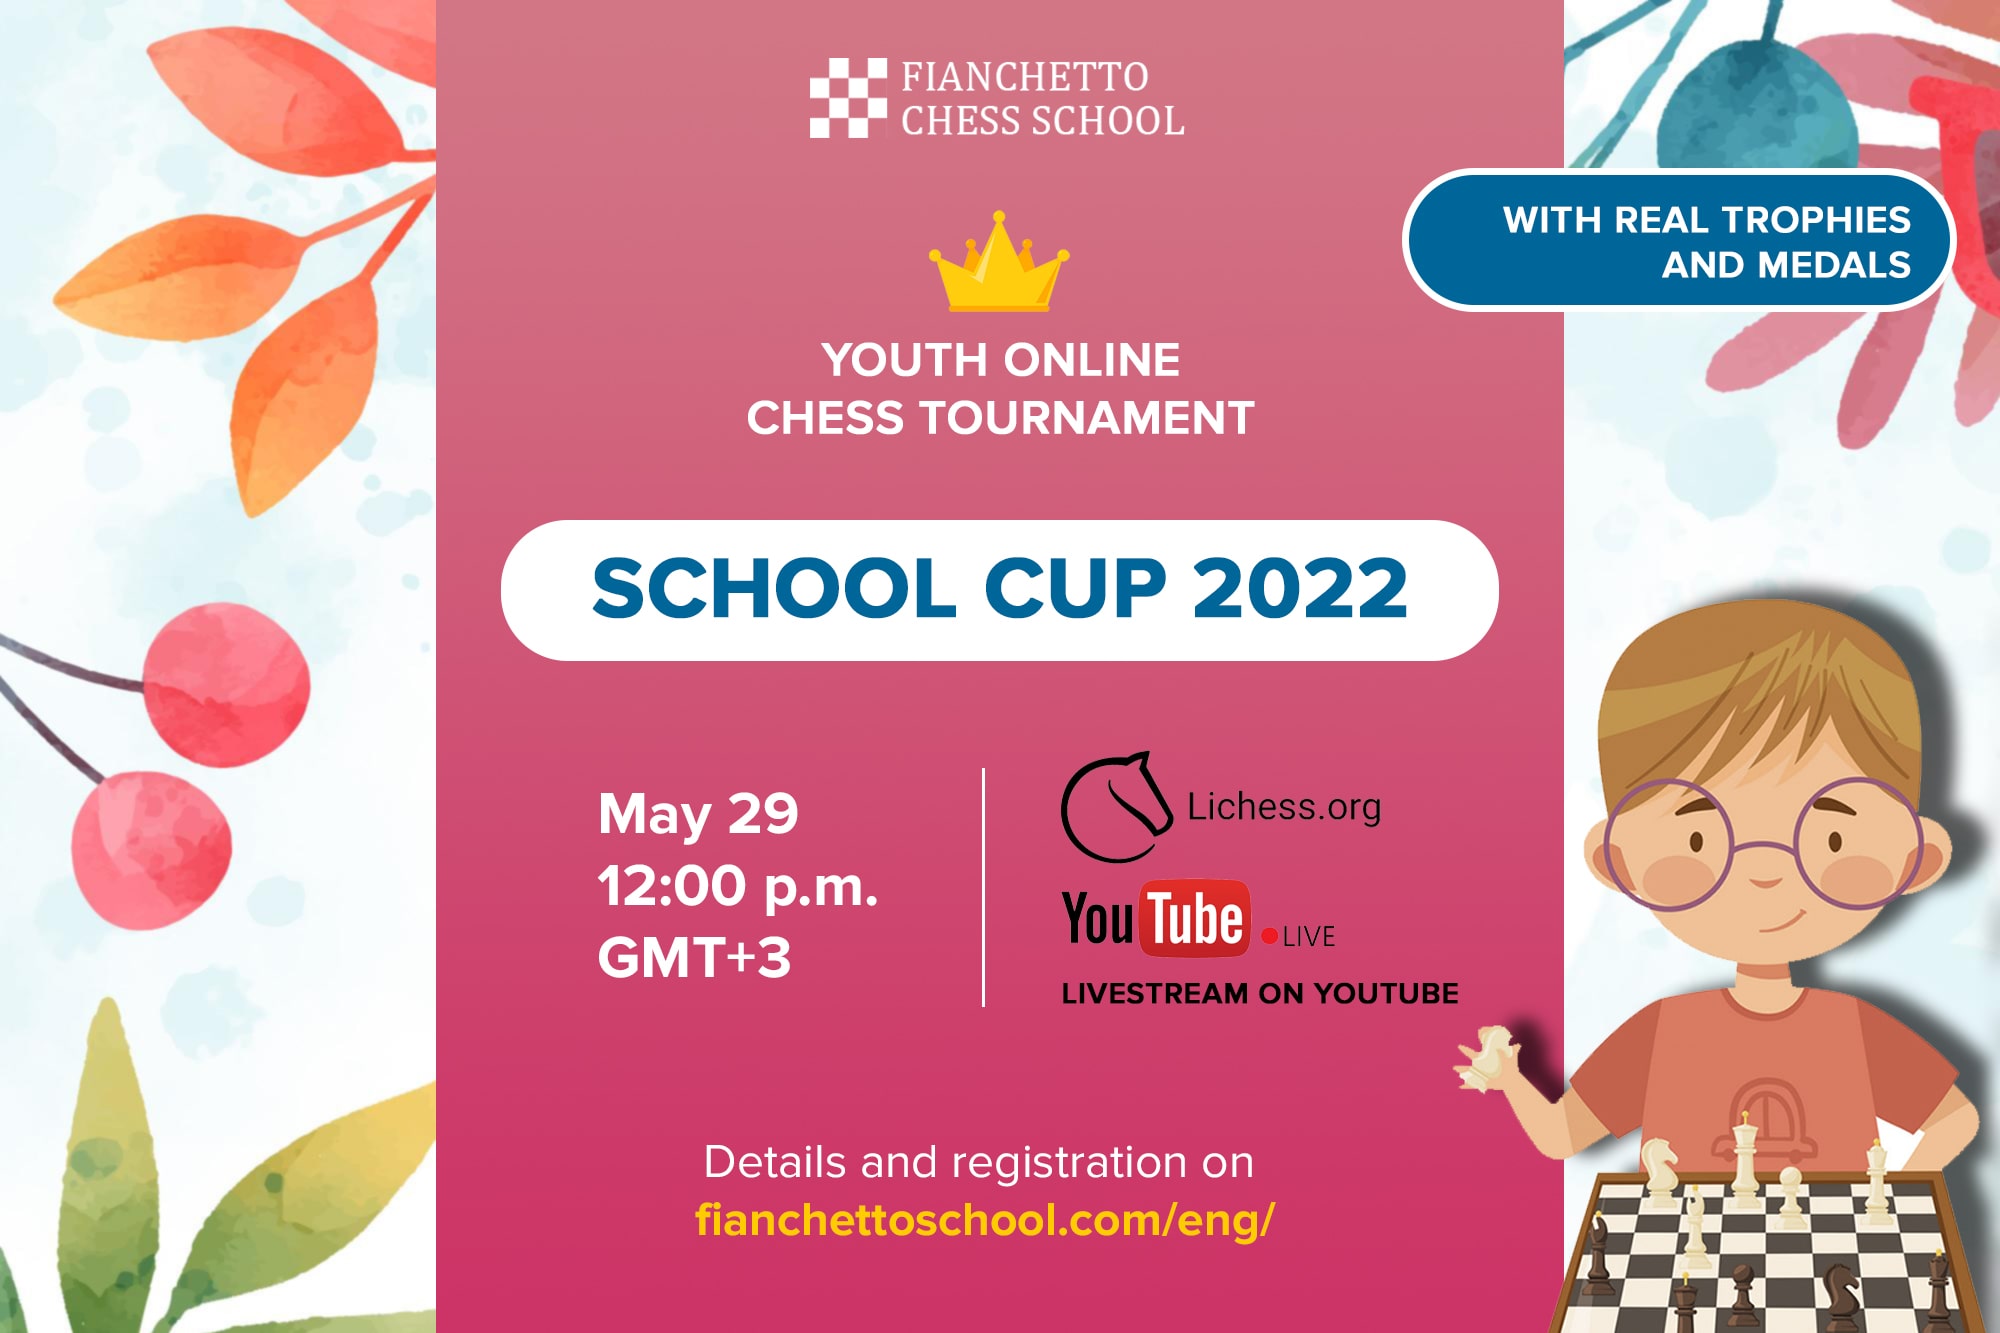 FIANCHETTO SCHOOL CHESS CUP 2022 - ONLINE YOUTH TOURNAMENT